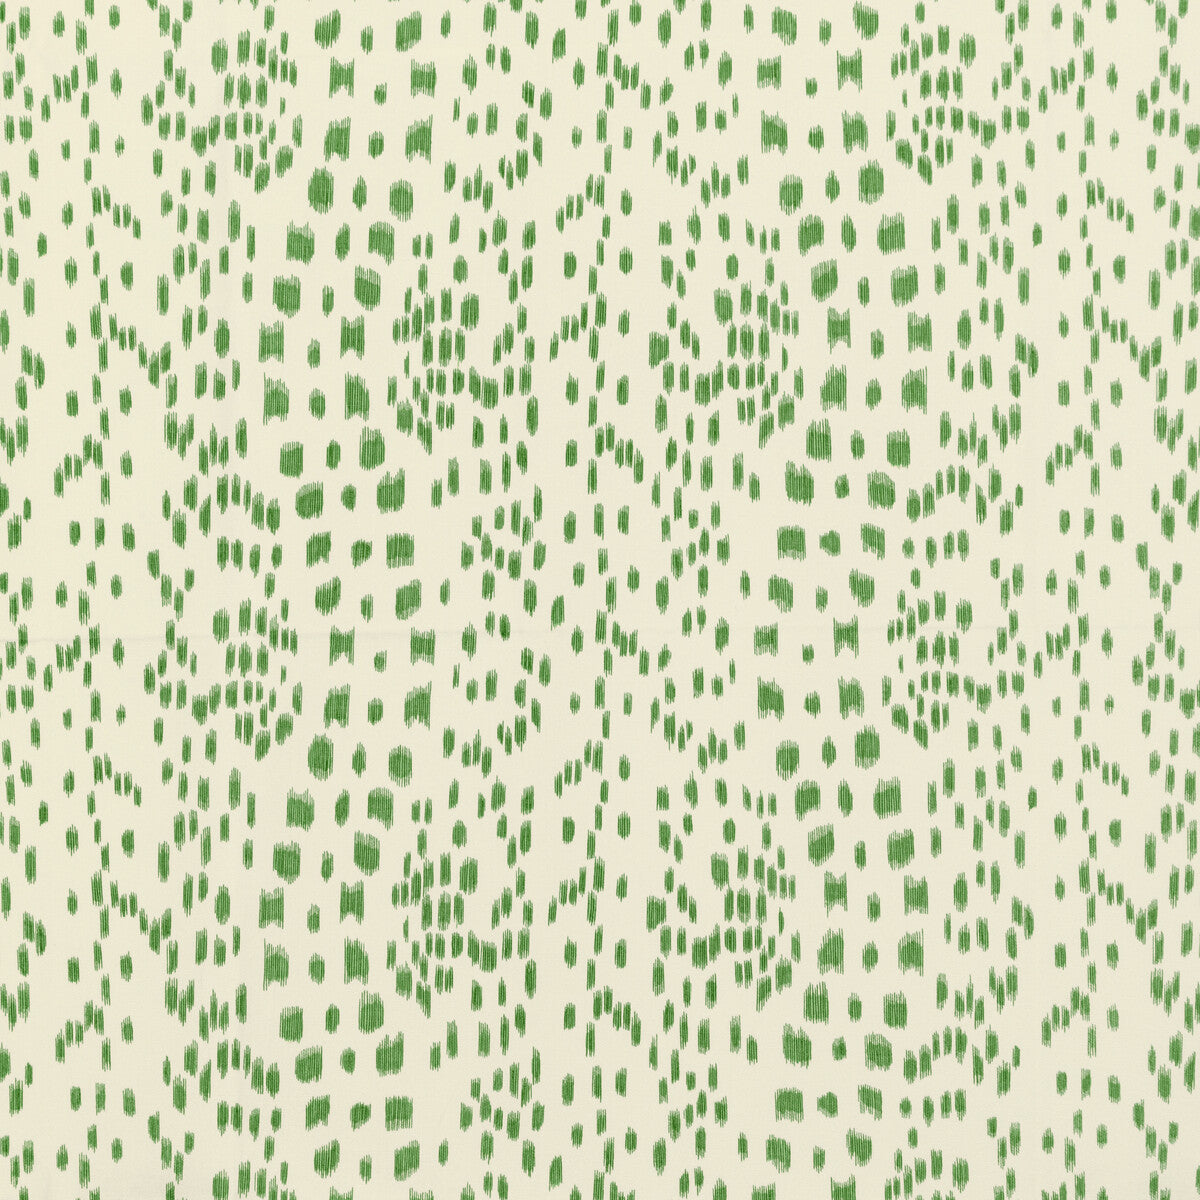 Les Touches II fabric in green color - pattern 8020131.3.0 - by Brunschwig &amp; Fils in the En Vacances II collection